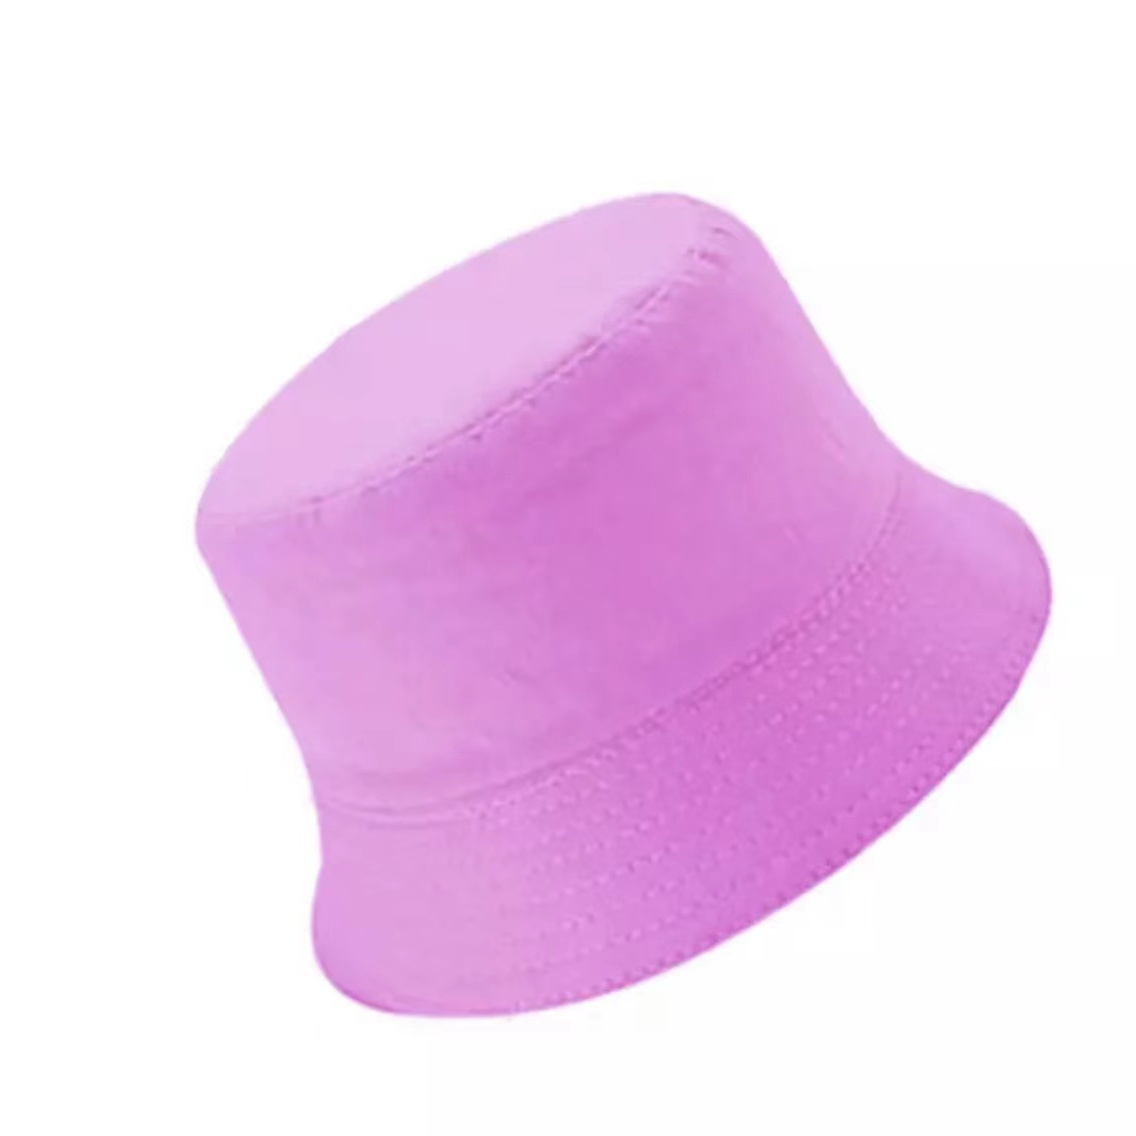 UV Protective Foldable Fisherman's Bucket Hat for Men and Women - Ideal for Fishing, Hiking, Camping, Gardening, and Beach Activities